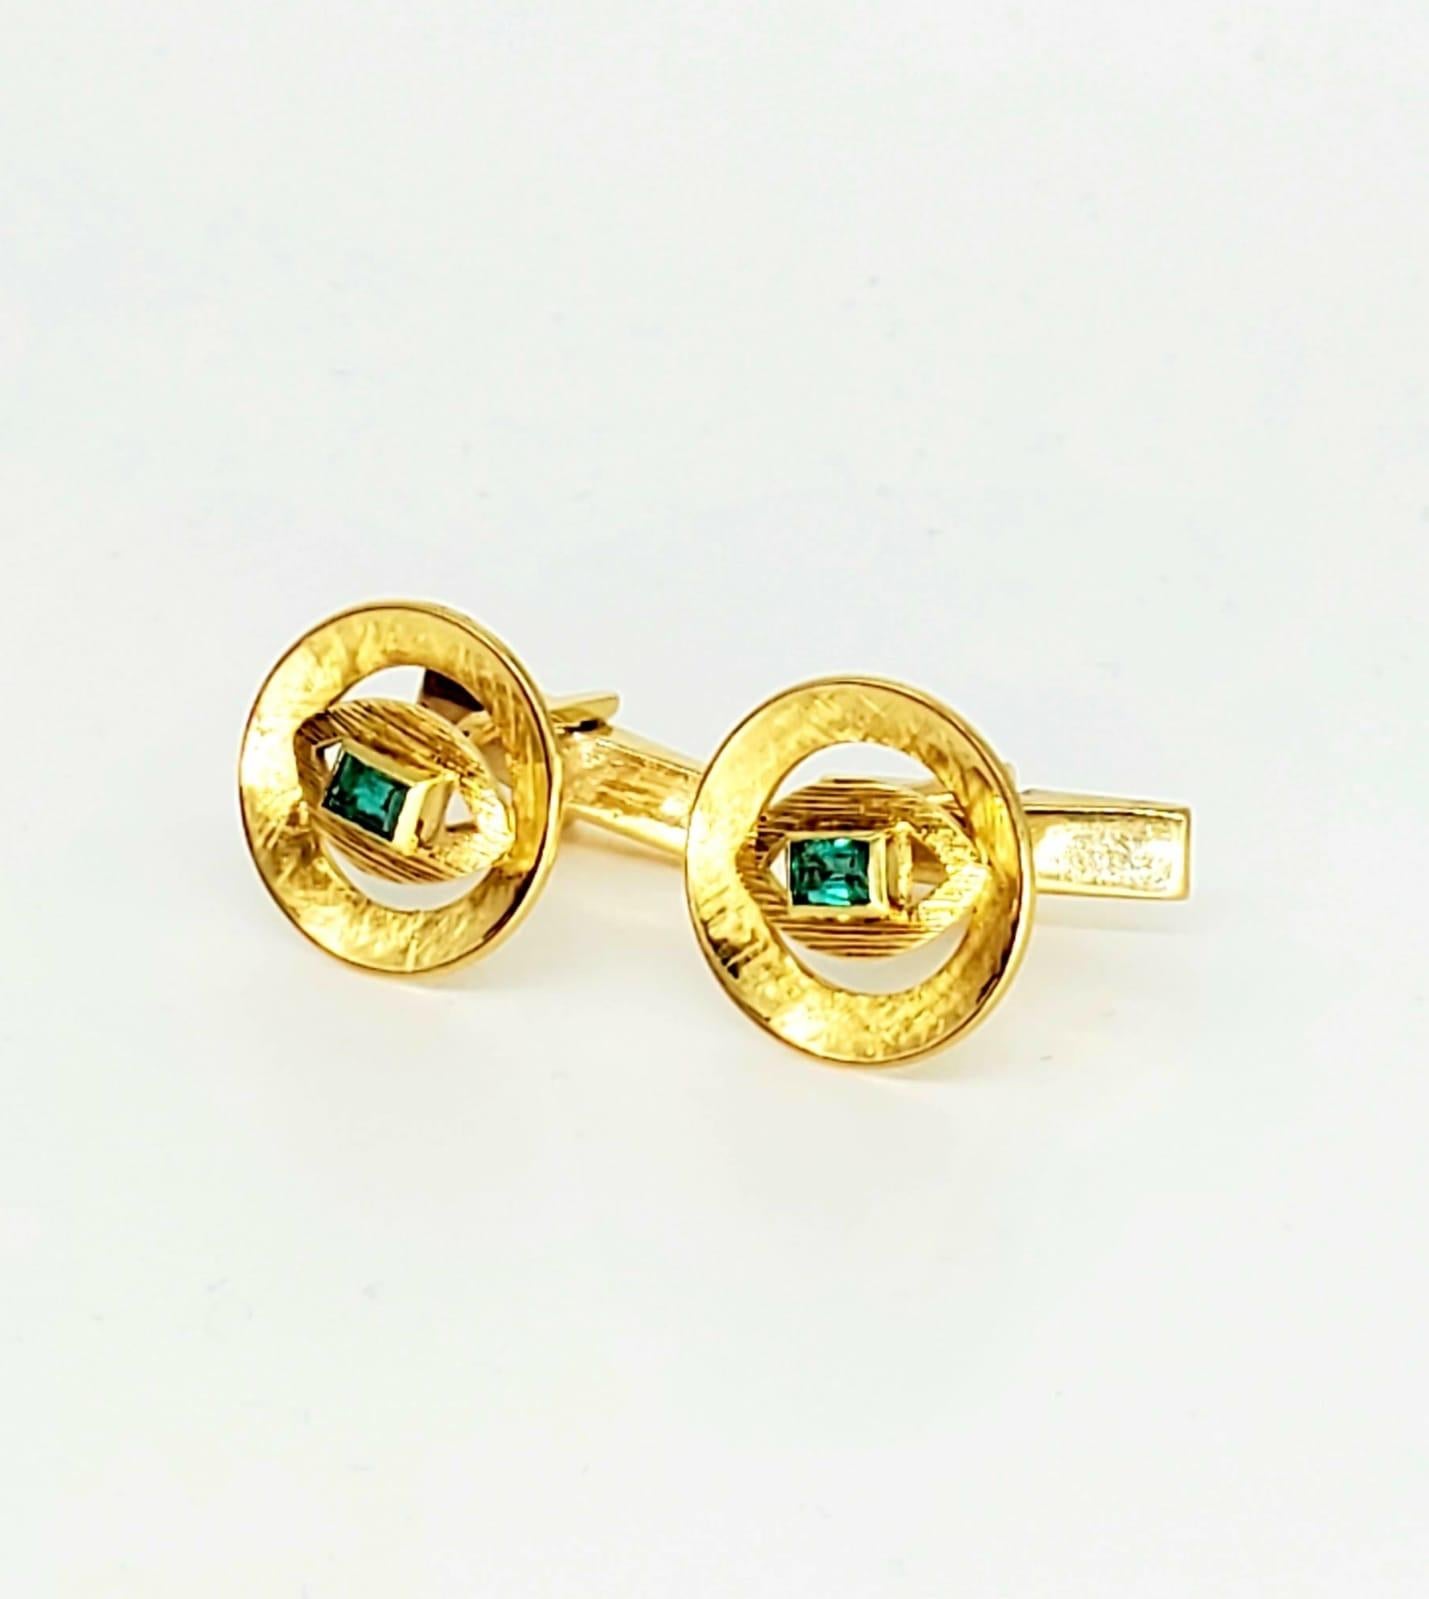 Vintage 0.50 Carat Emerald Cufflinks 18k Gold. The Cufflinks measure 1”x0.50” and weights approx 9 grams 18k.